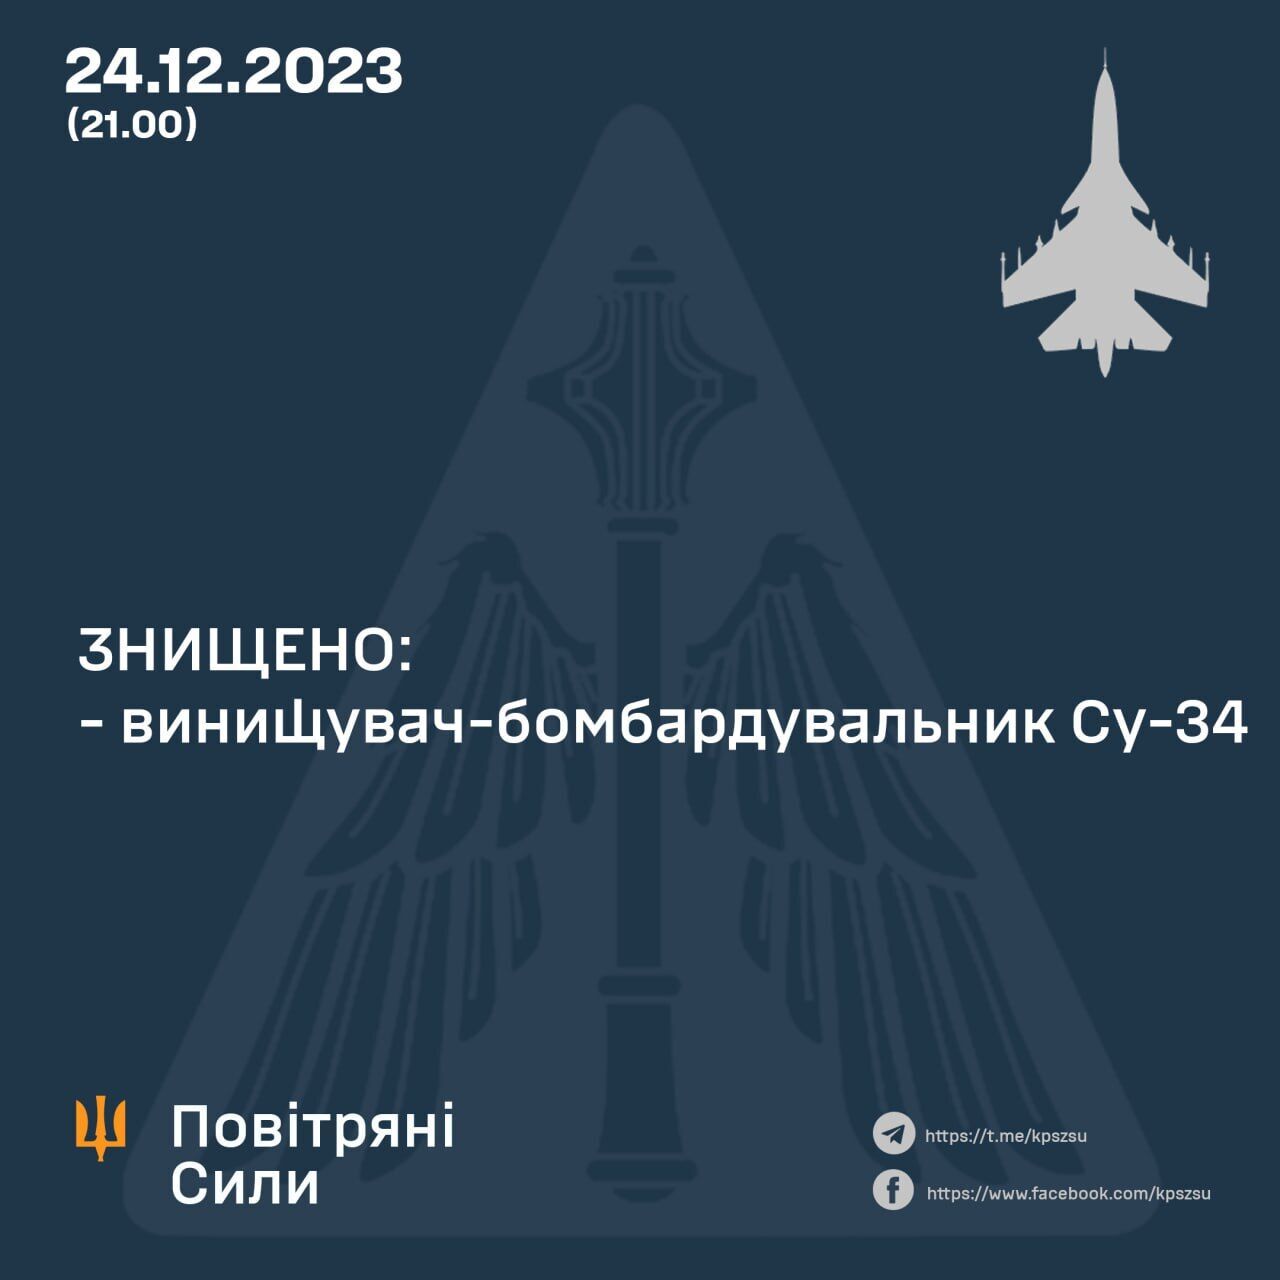 Ukrainian Armed Forces shoot down Russian Su-34 bomber, Su-30 fighter in question: details